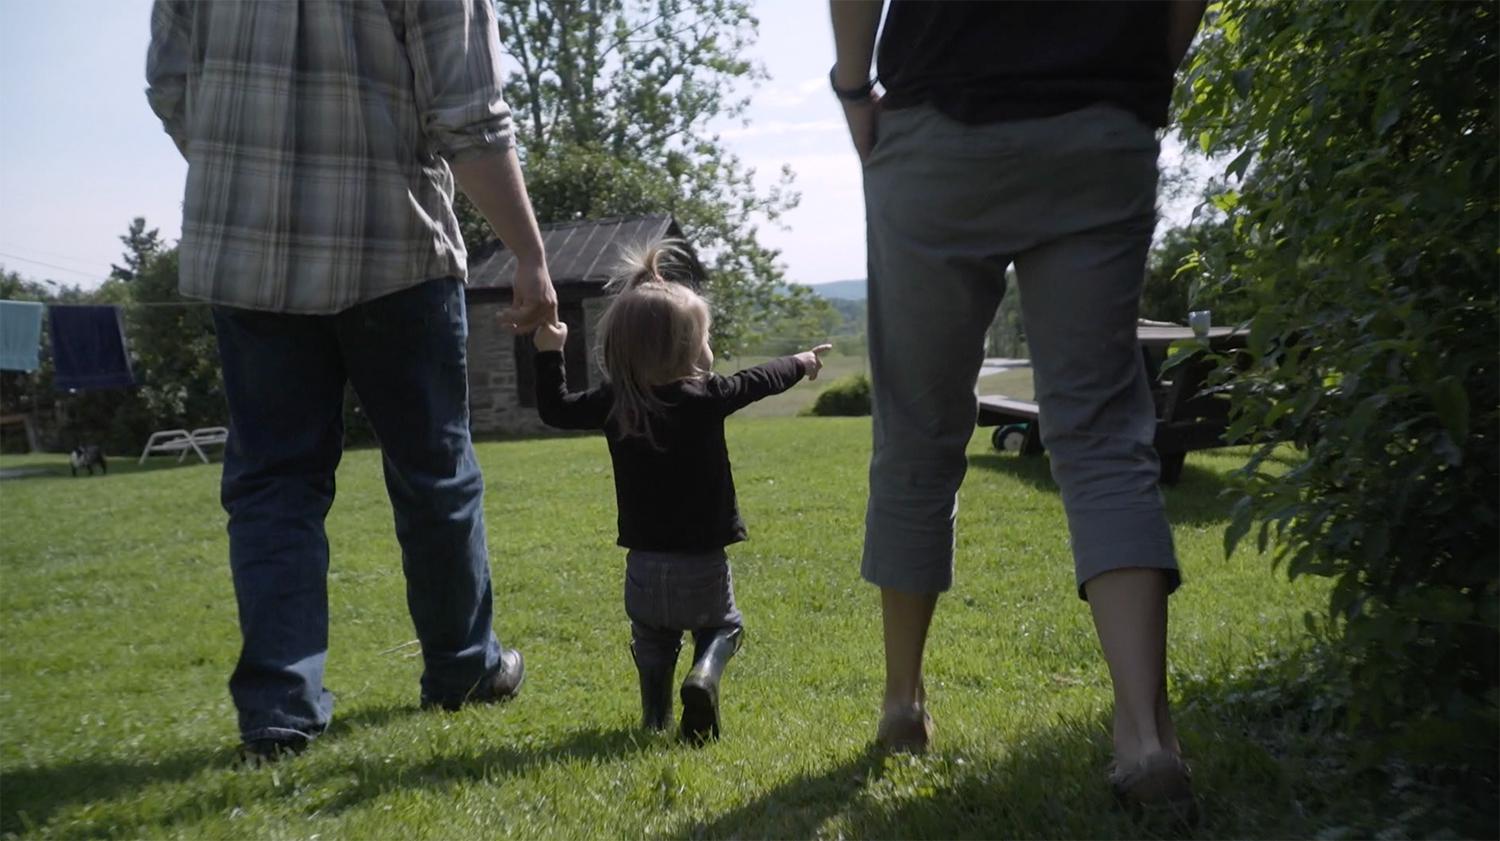 A two-and-a-half-year old born with intersex traits walks with her parents in their garden. The parents have decided to defer all medically unnecessary surgeries until their child can decide for herself.